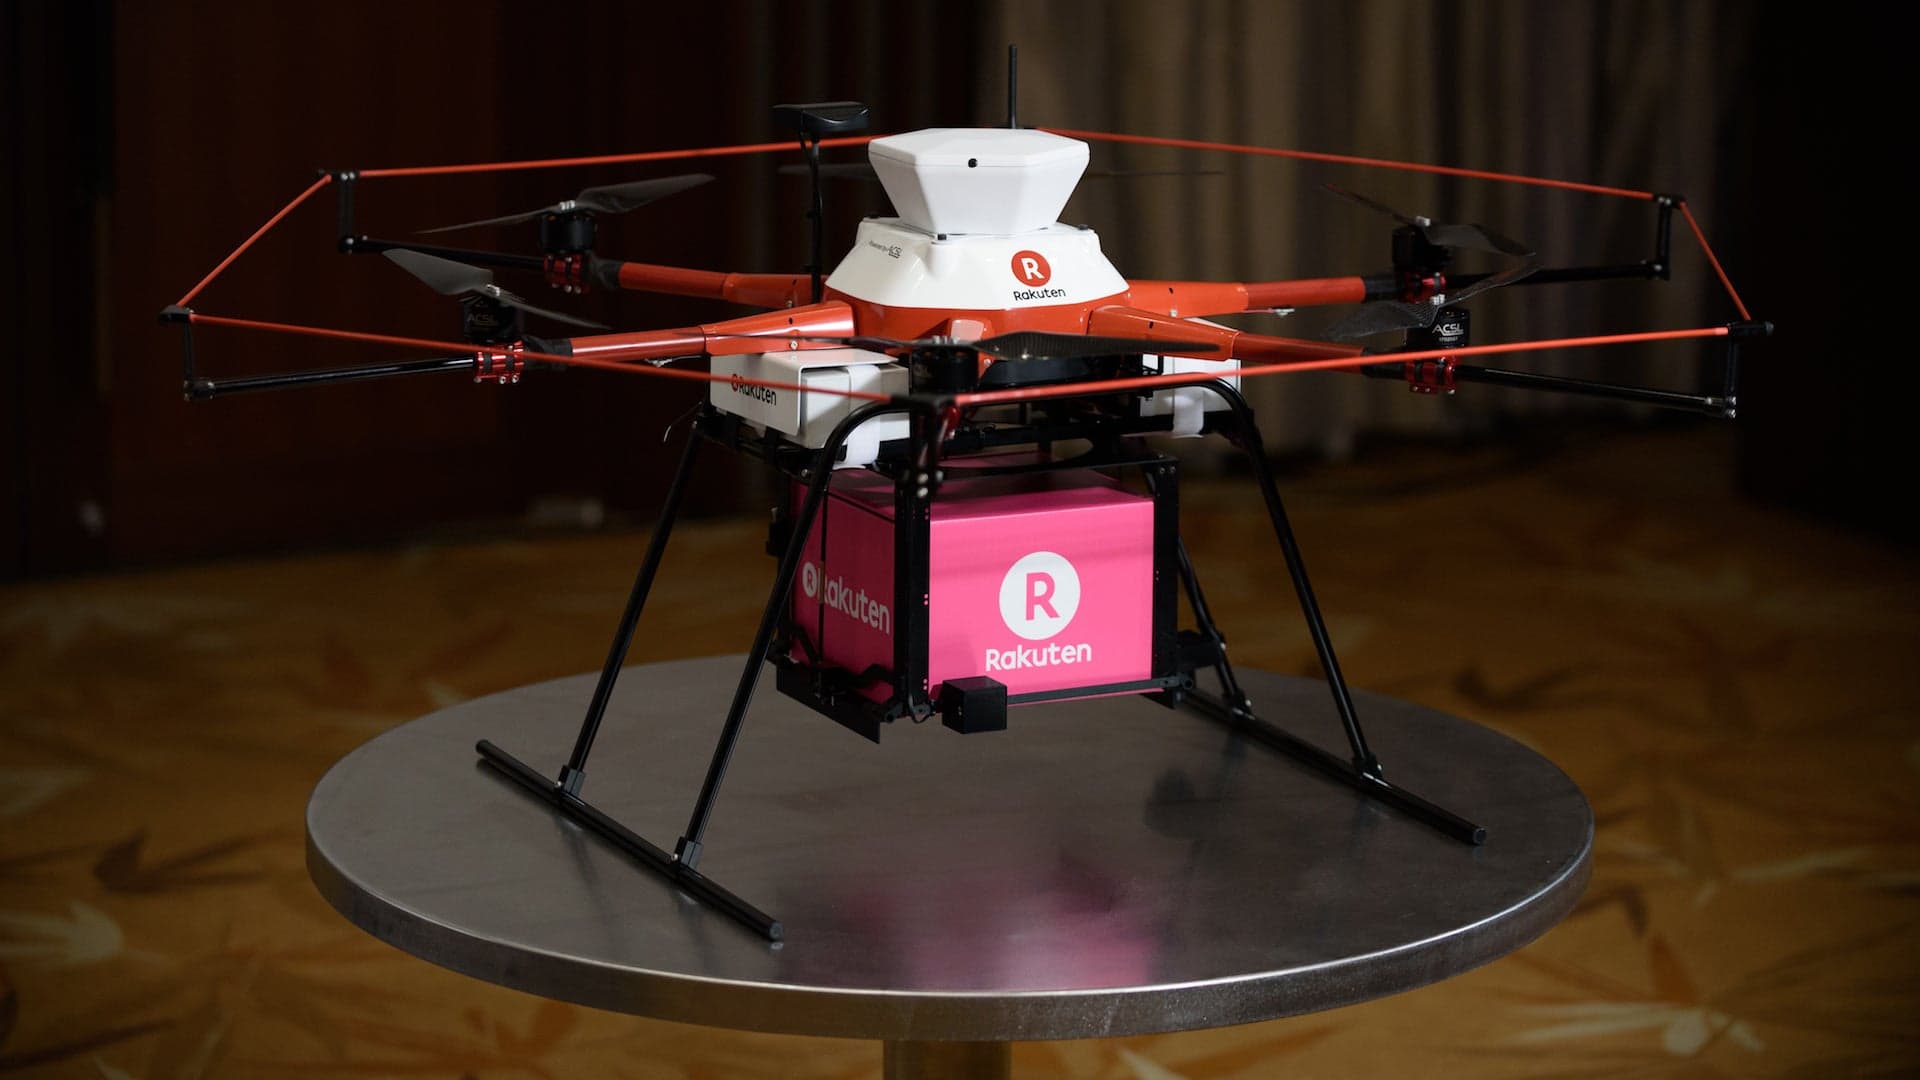 Odaka, Ravaged by Fukushima’s Nuclear Disaster, Sees Hope in Drone Food Delivery